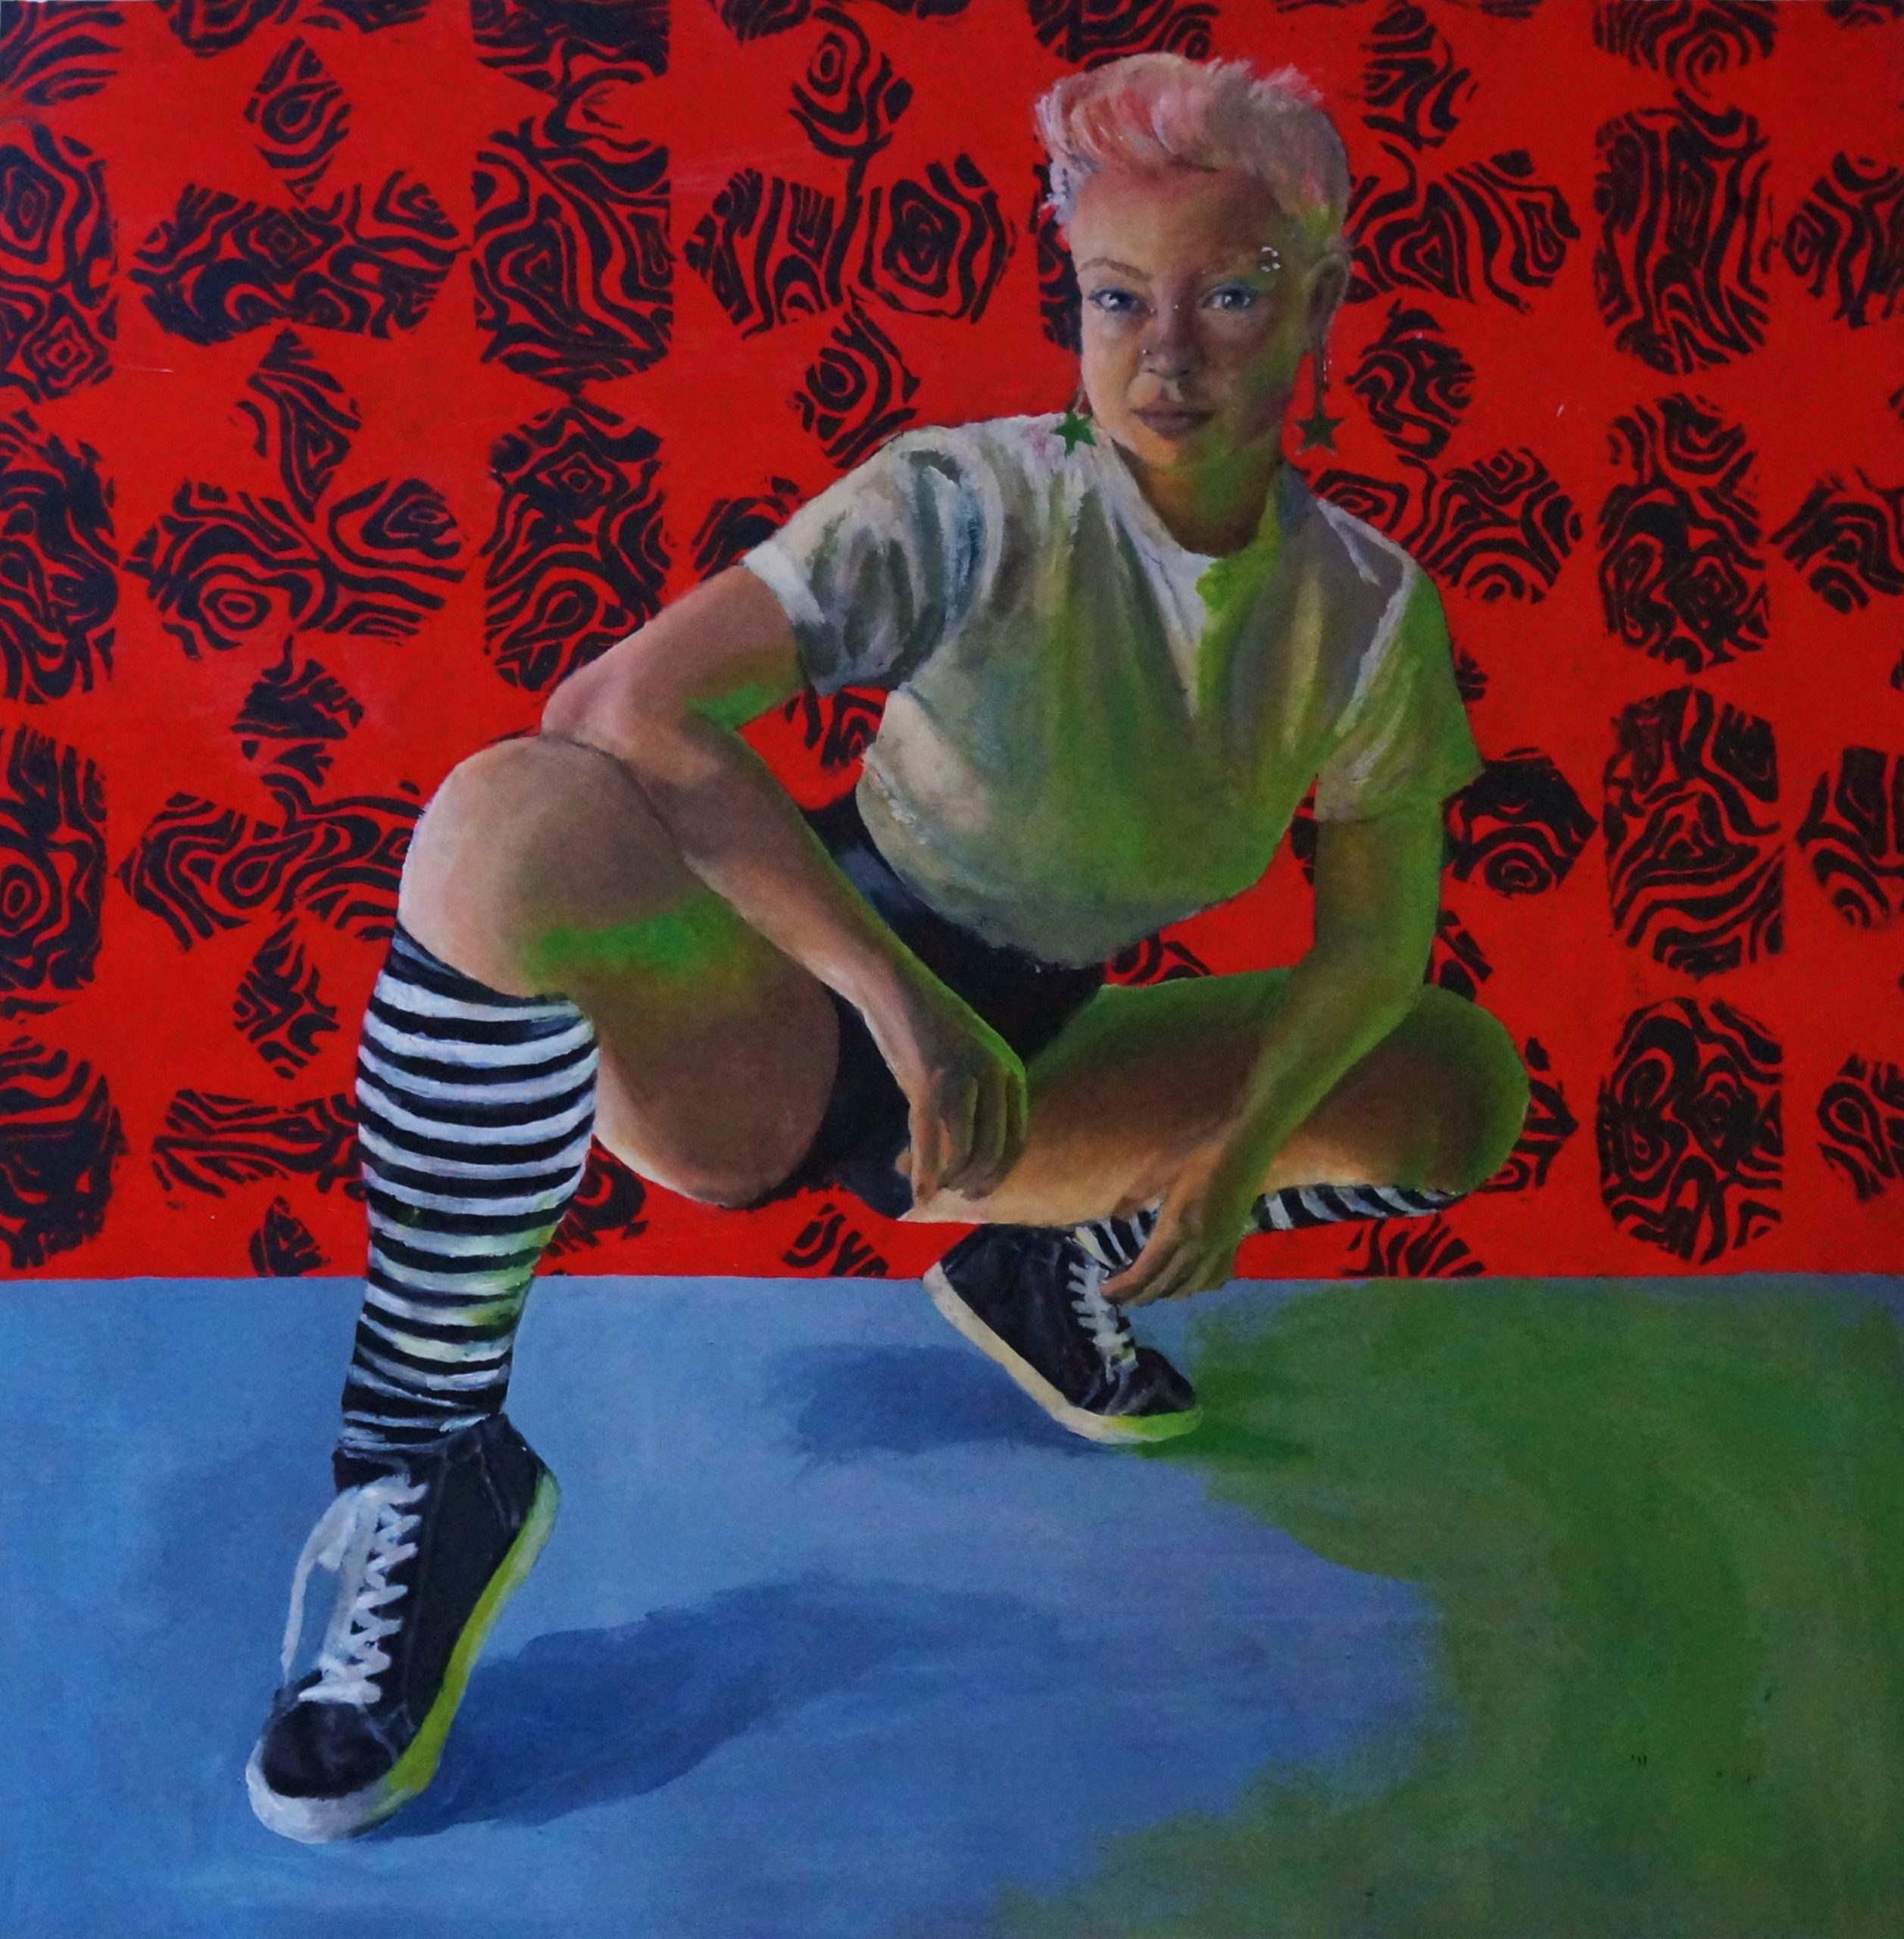 A woman with pink hair and striped socks crouches in front of a red background.